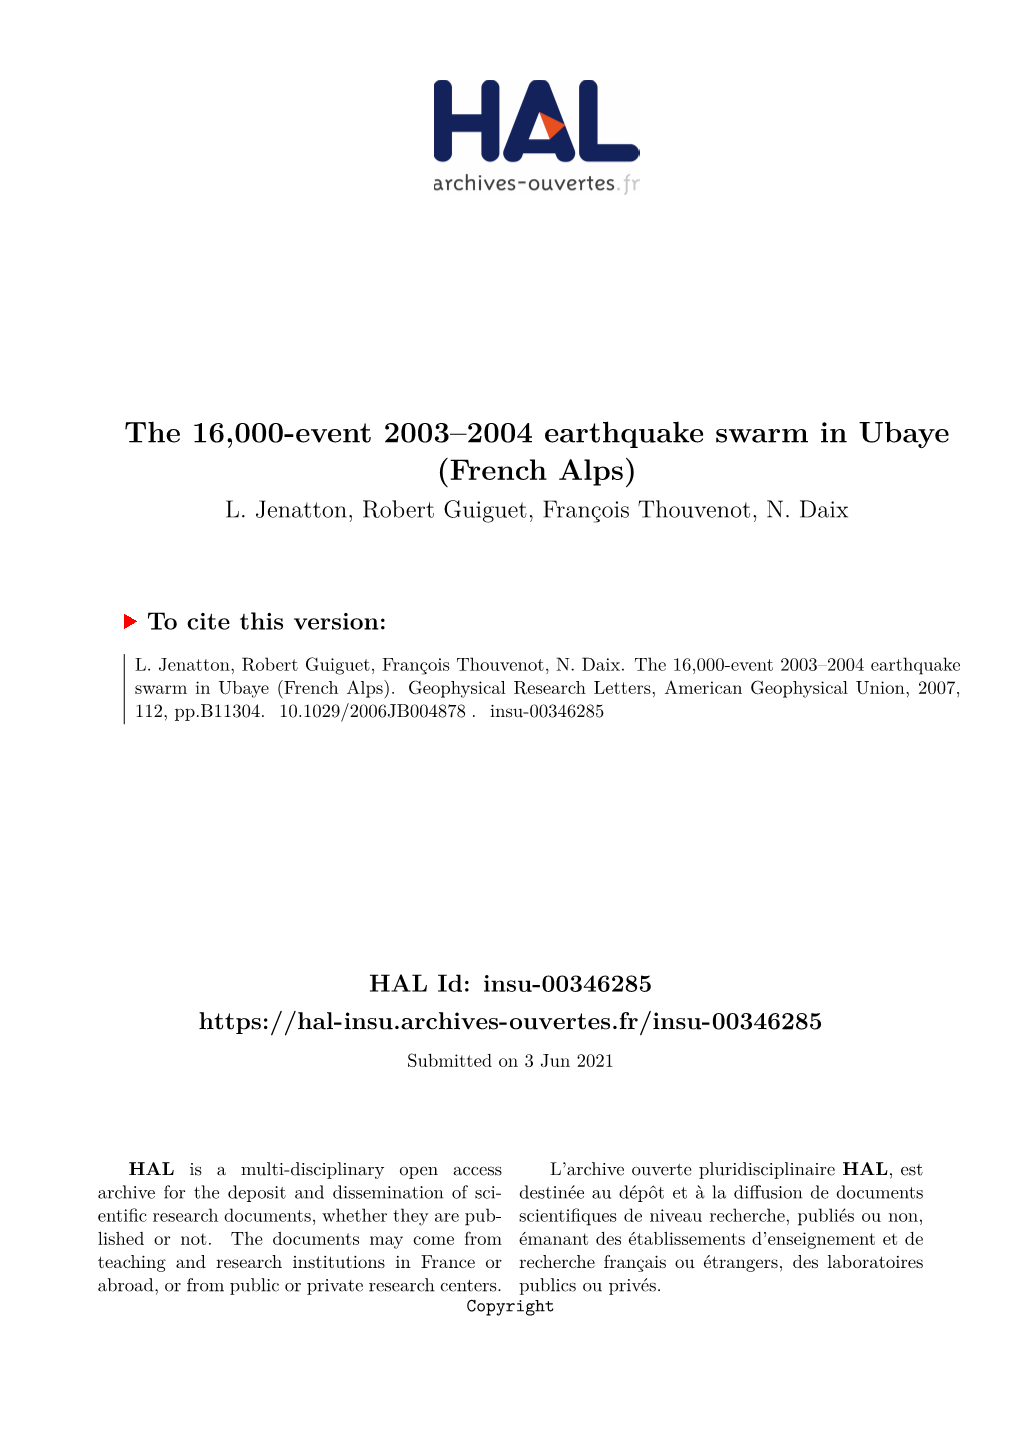 The 16,000-Event 2003–2004 Earthquake Swarm in Ubaye (French Alps) L